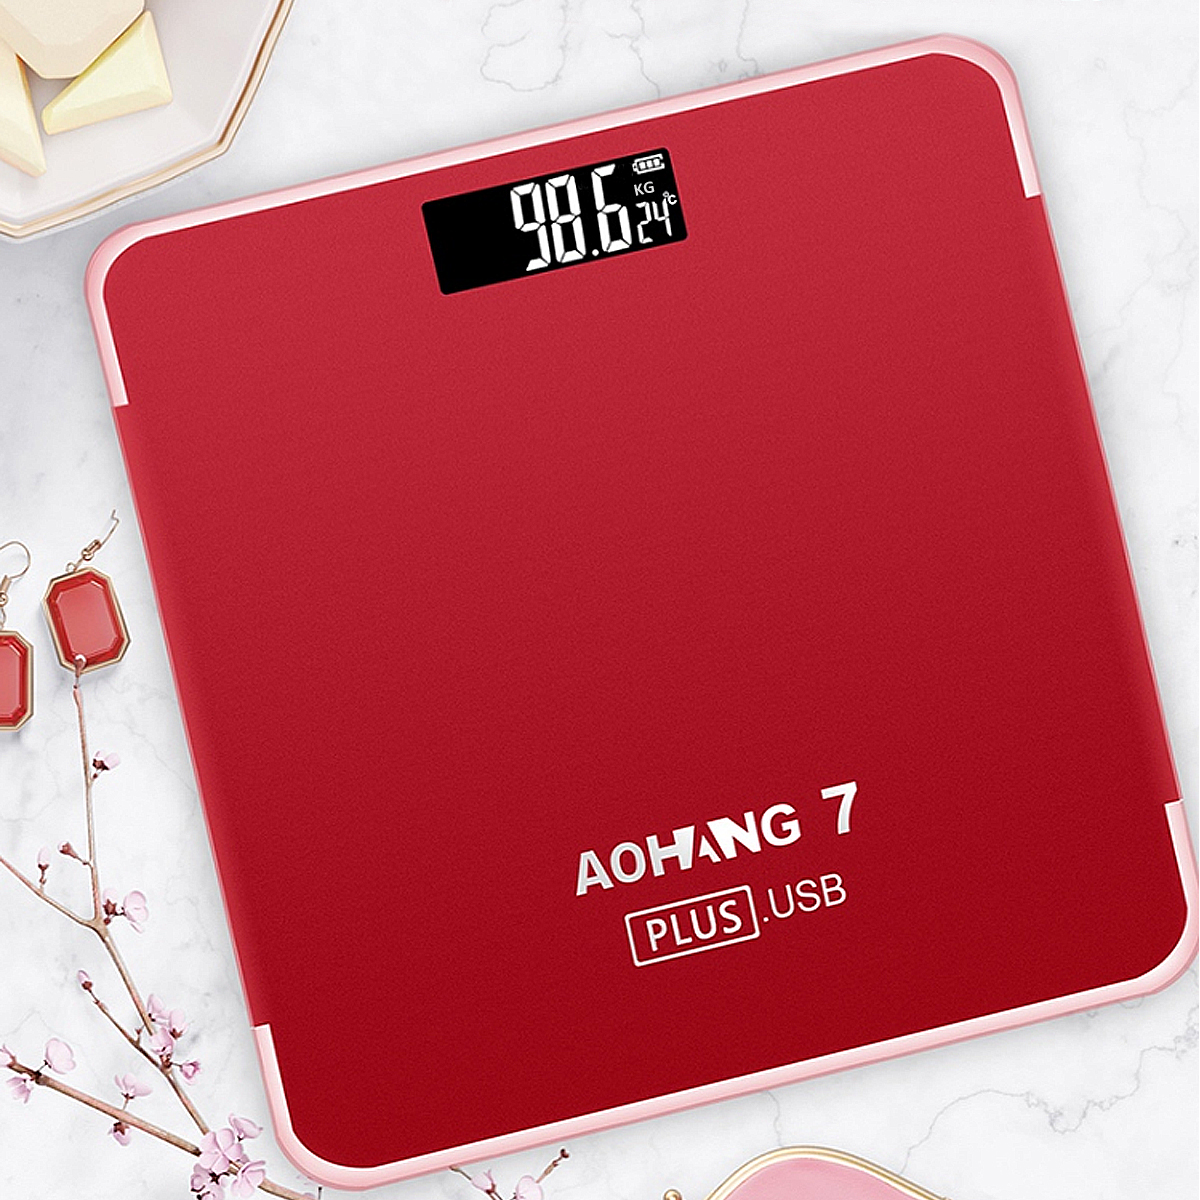 AOHANG-7-Plus-USB-Version-180kg-LCD-Electronic-Digital-Tempered-Glass-Body-Weight-Scale-1238740-9